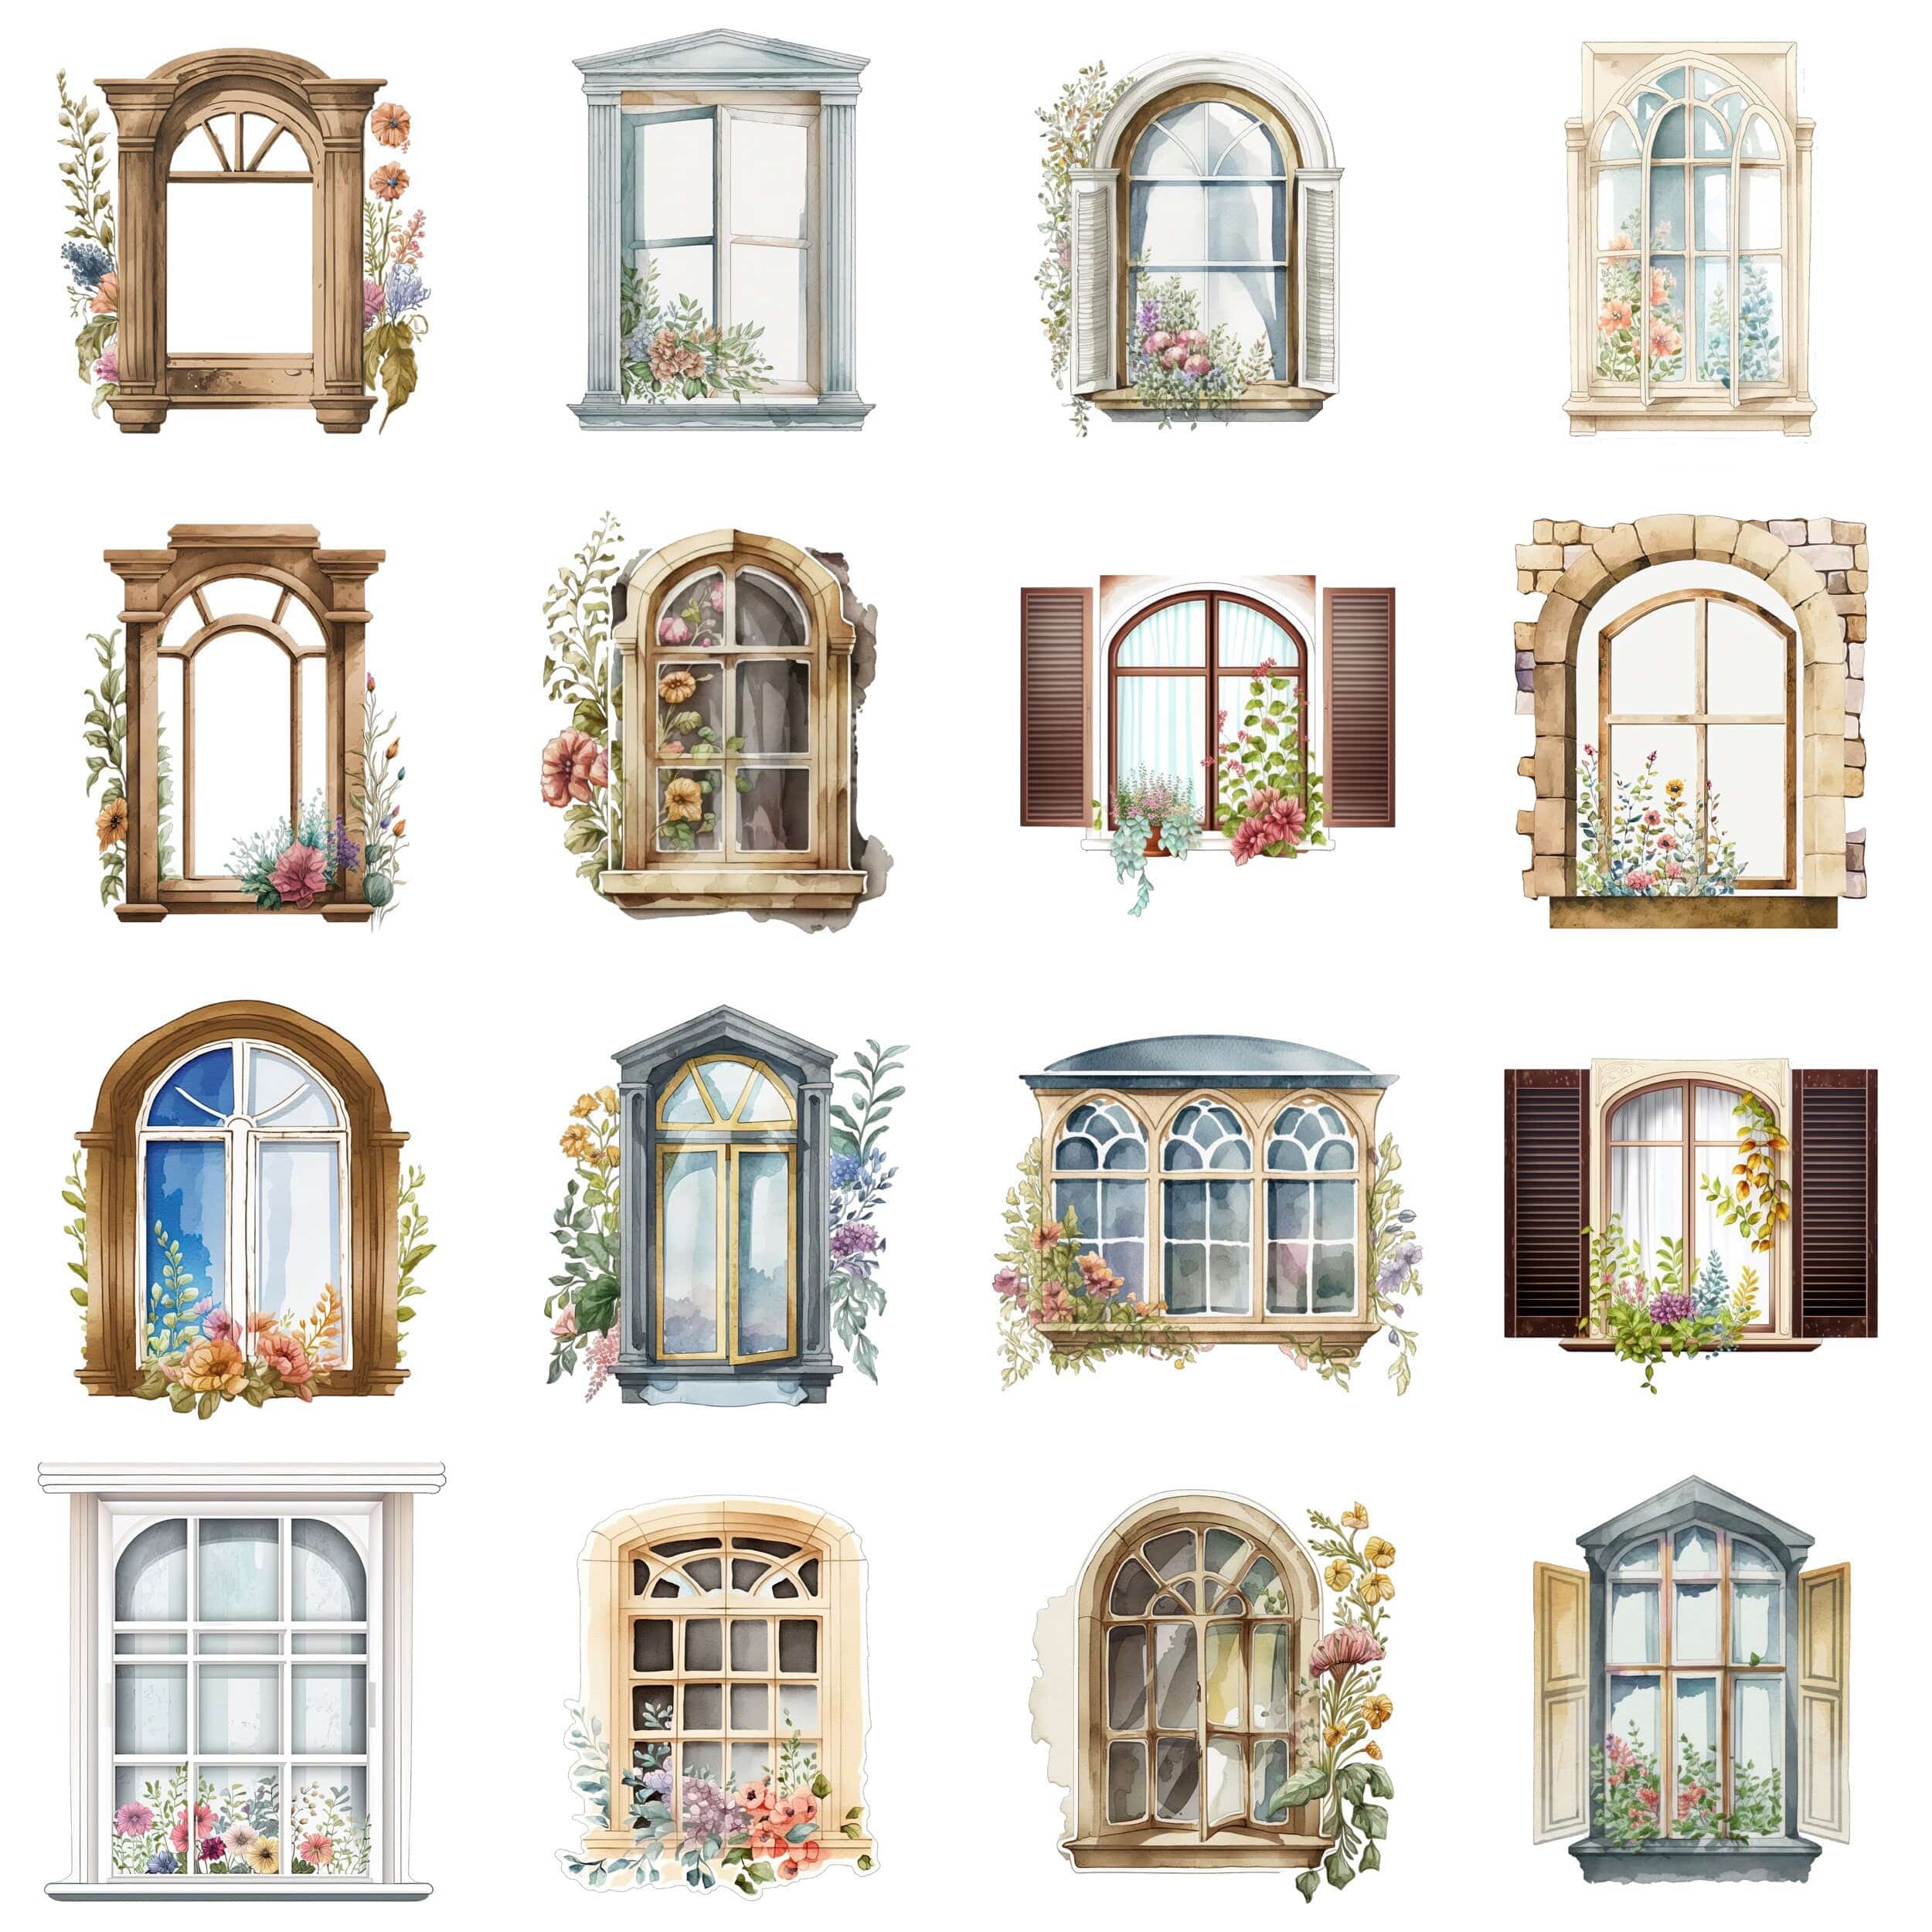 Watercolor Windows Clipart - Windows with flowers PNG format instant download for commercial use - Sublimation file Digital Download Sumobundle